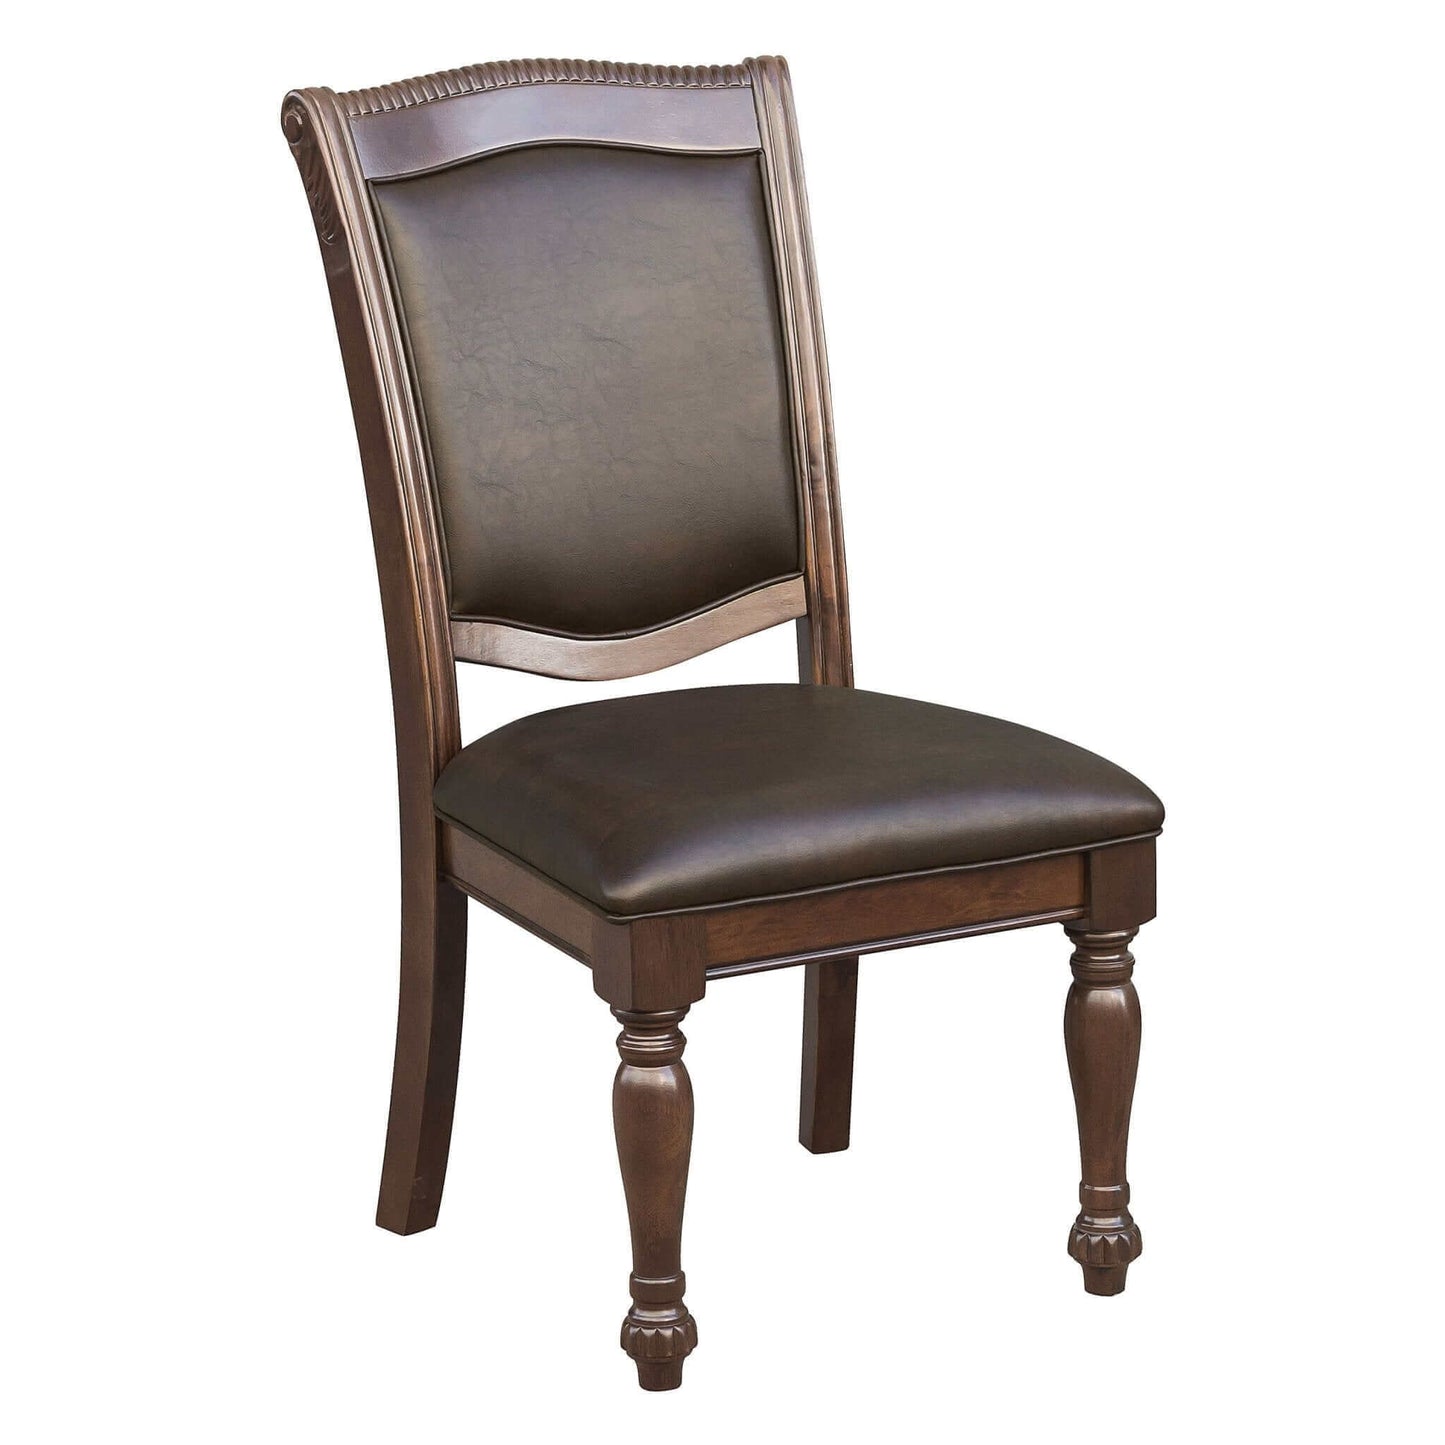 Brown cherry finish traditional style dining chair with upholstered seat.